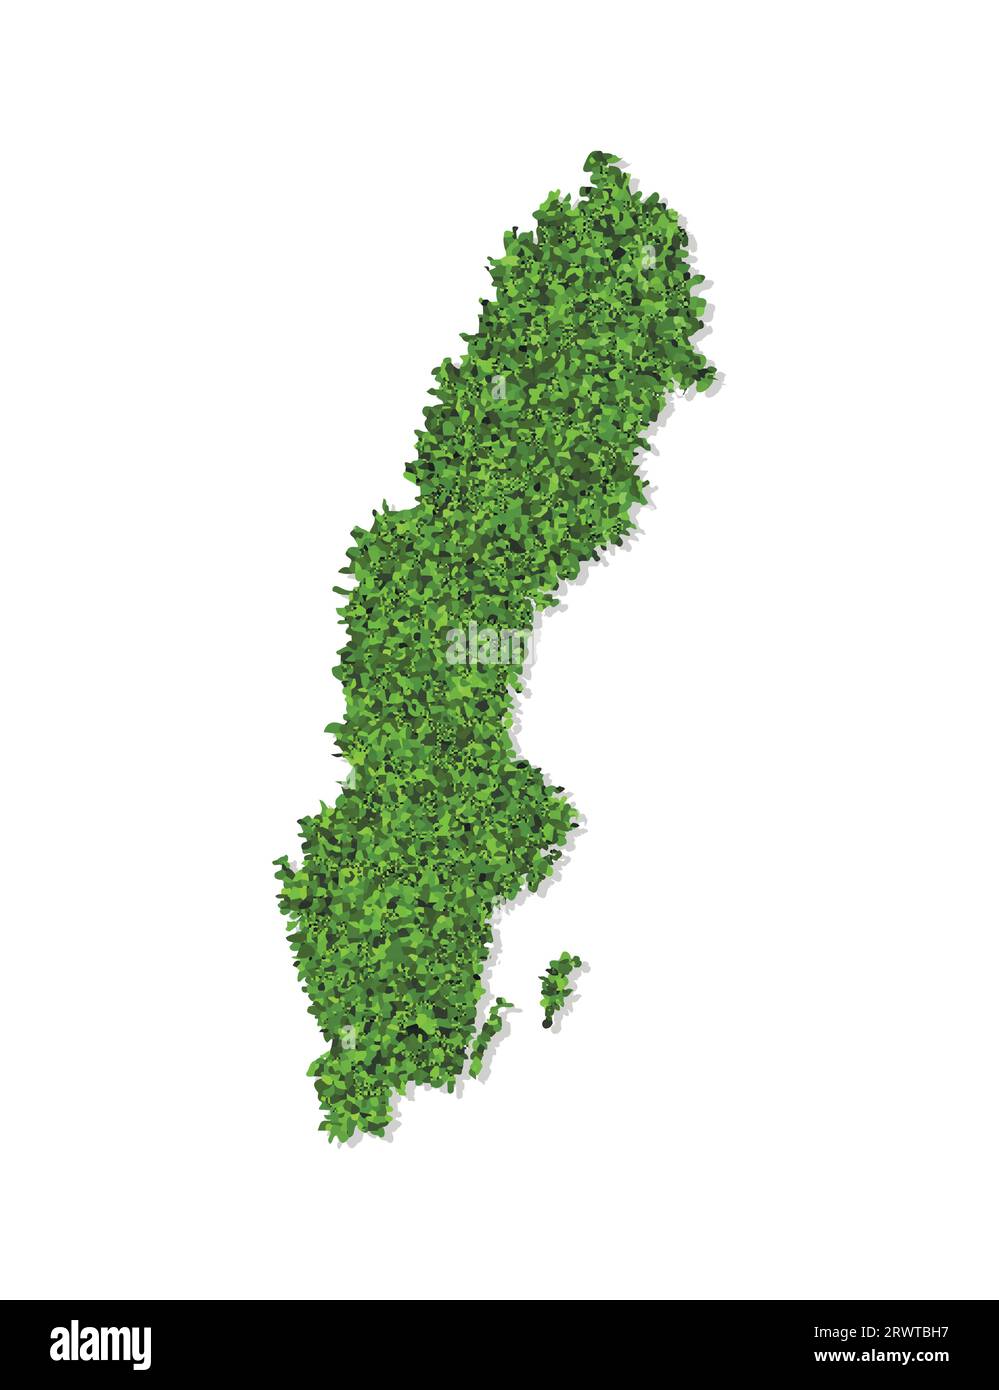 Sweden set detailed country shape with region Vector Image